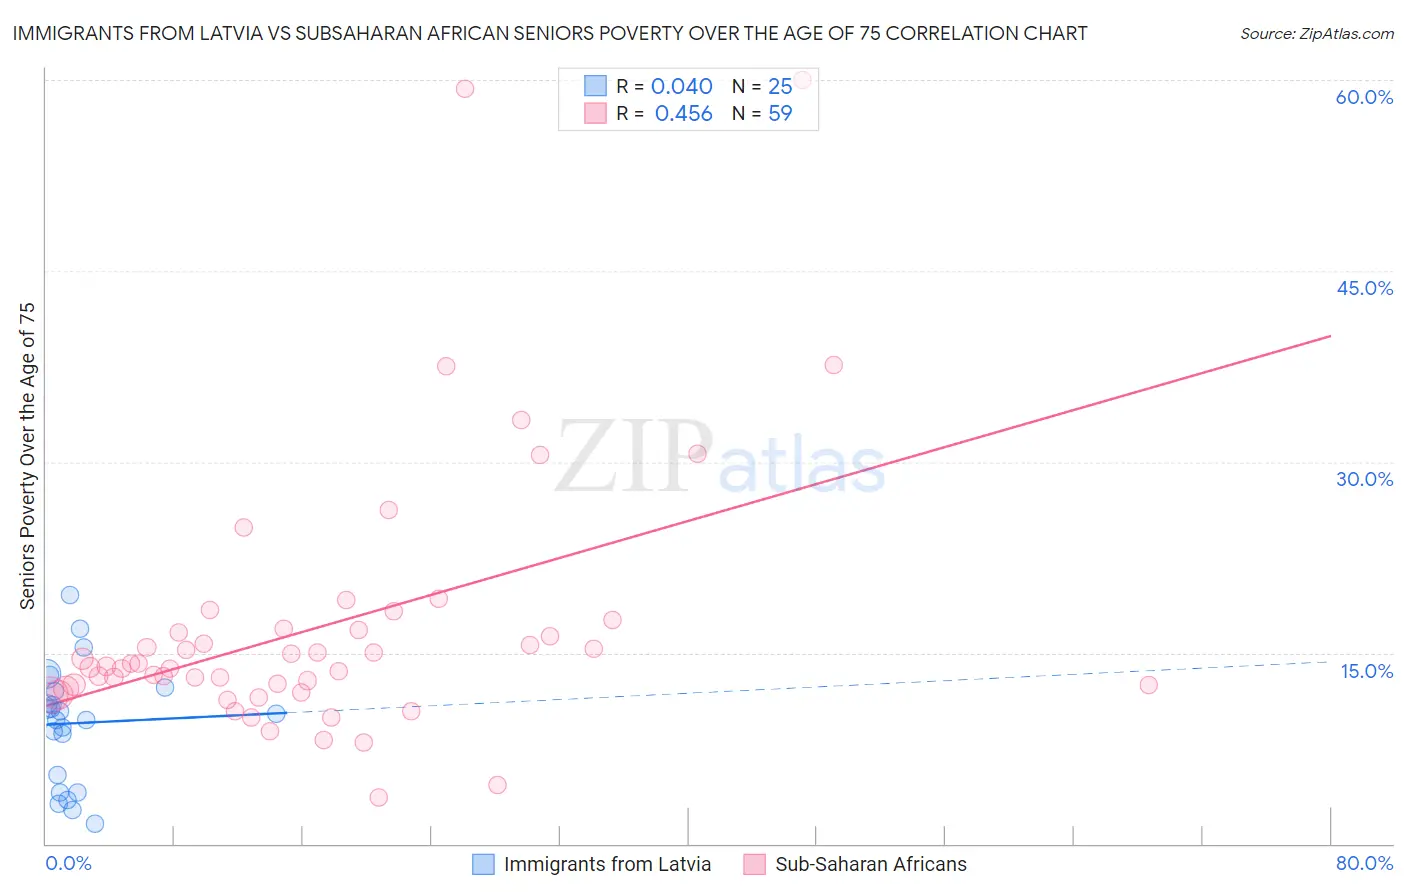 Immigrants from Latvia vs Subsaharan African Seniors Poverty Over the Age of 75